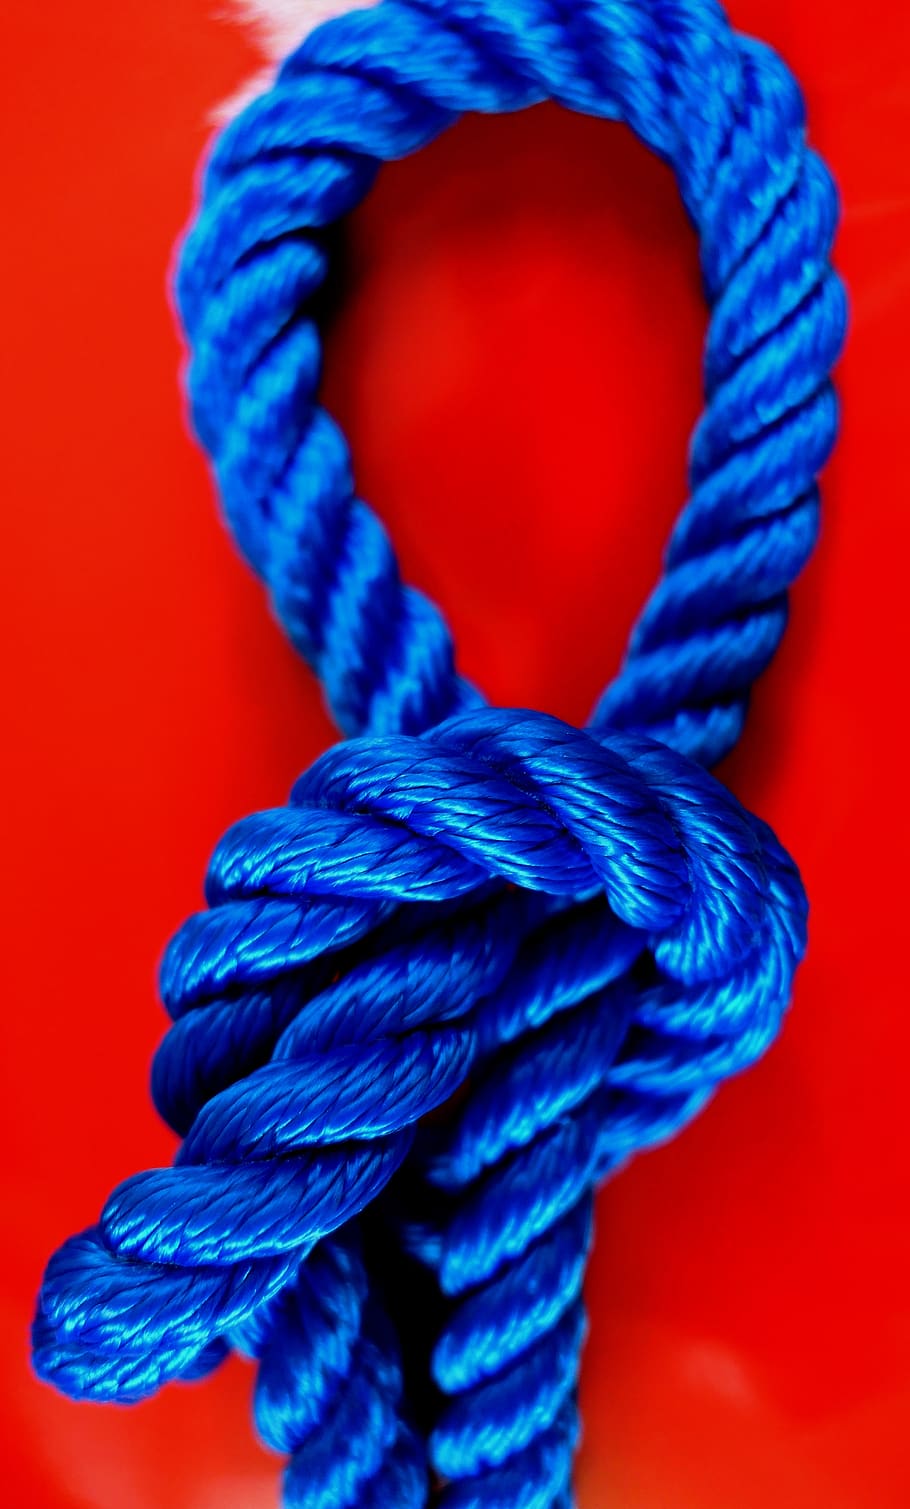 knot, fixing, containing, rope, dew, knitting, hold tight, woven, knotted, twisted ropes